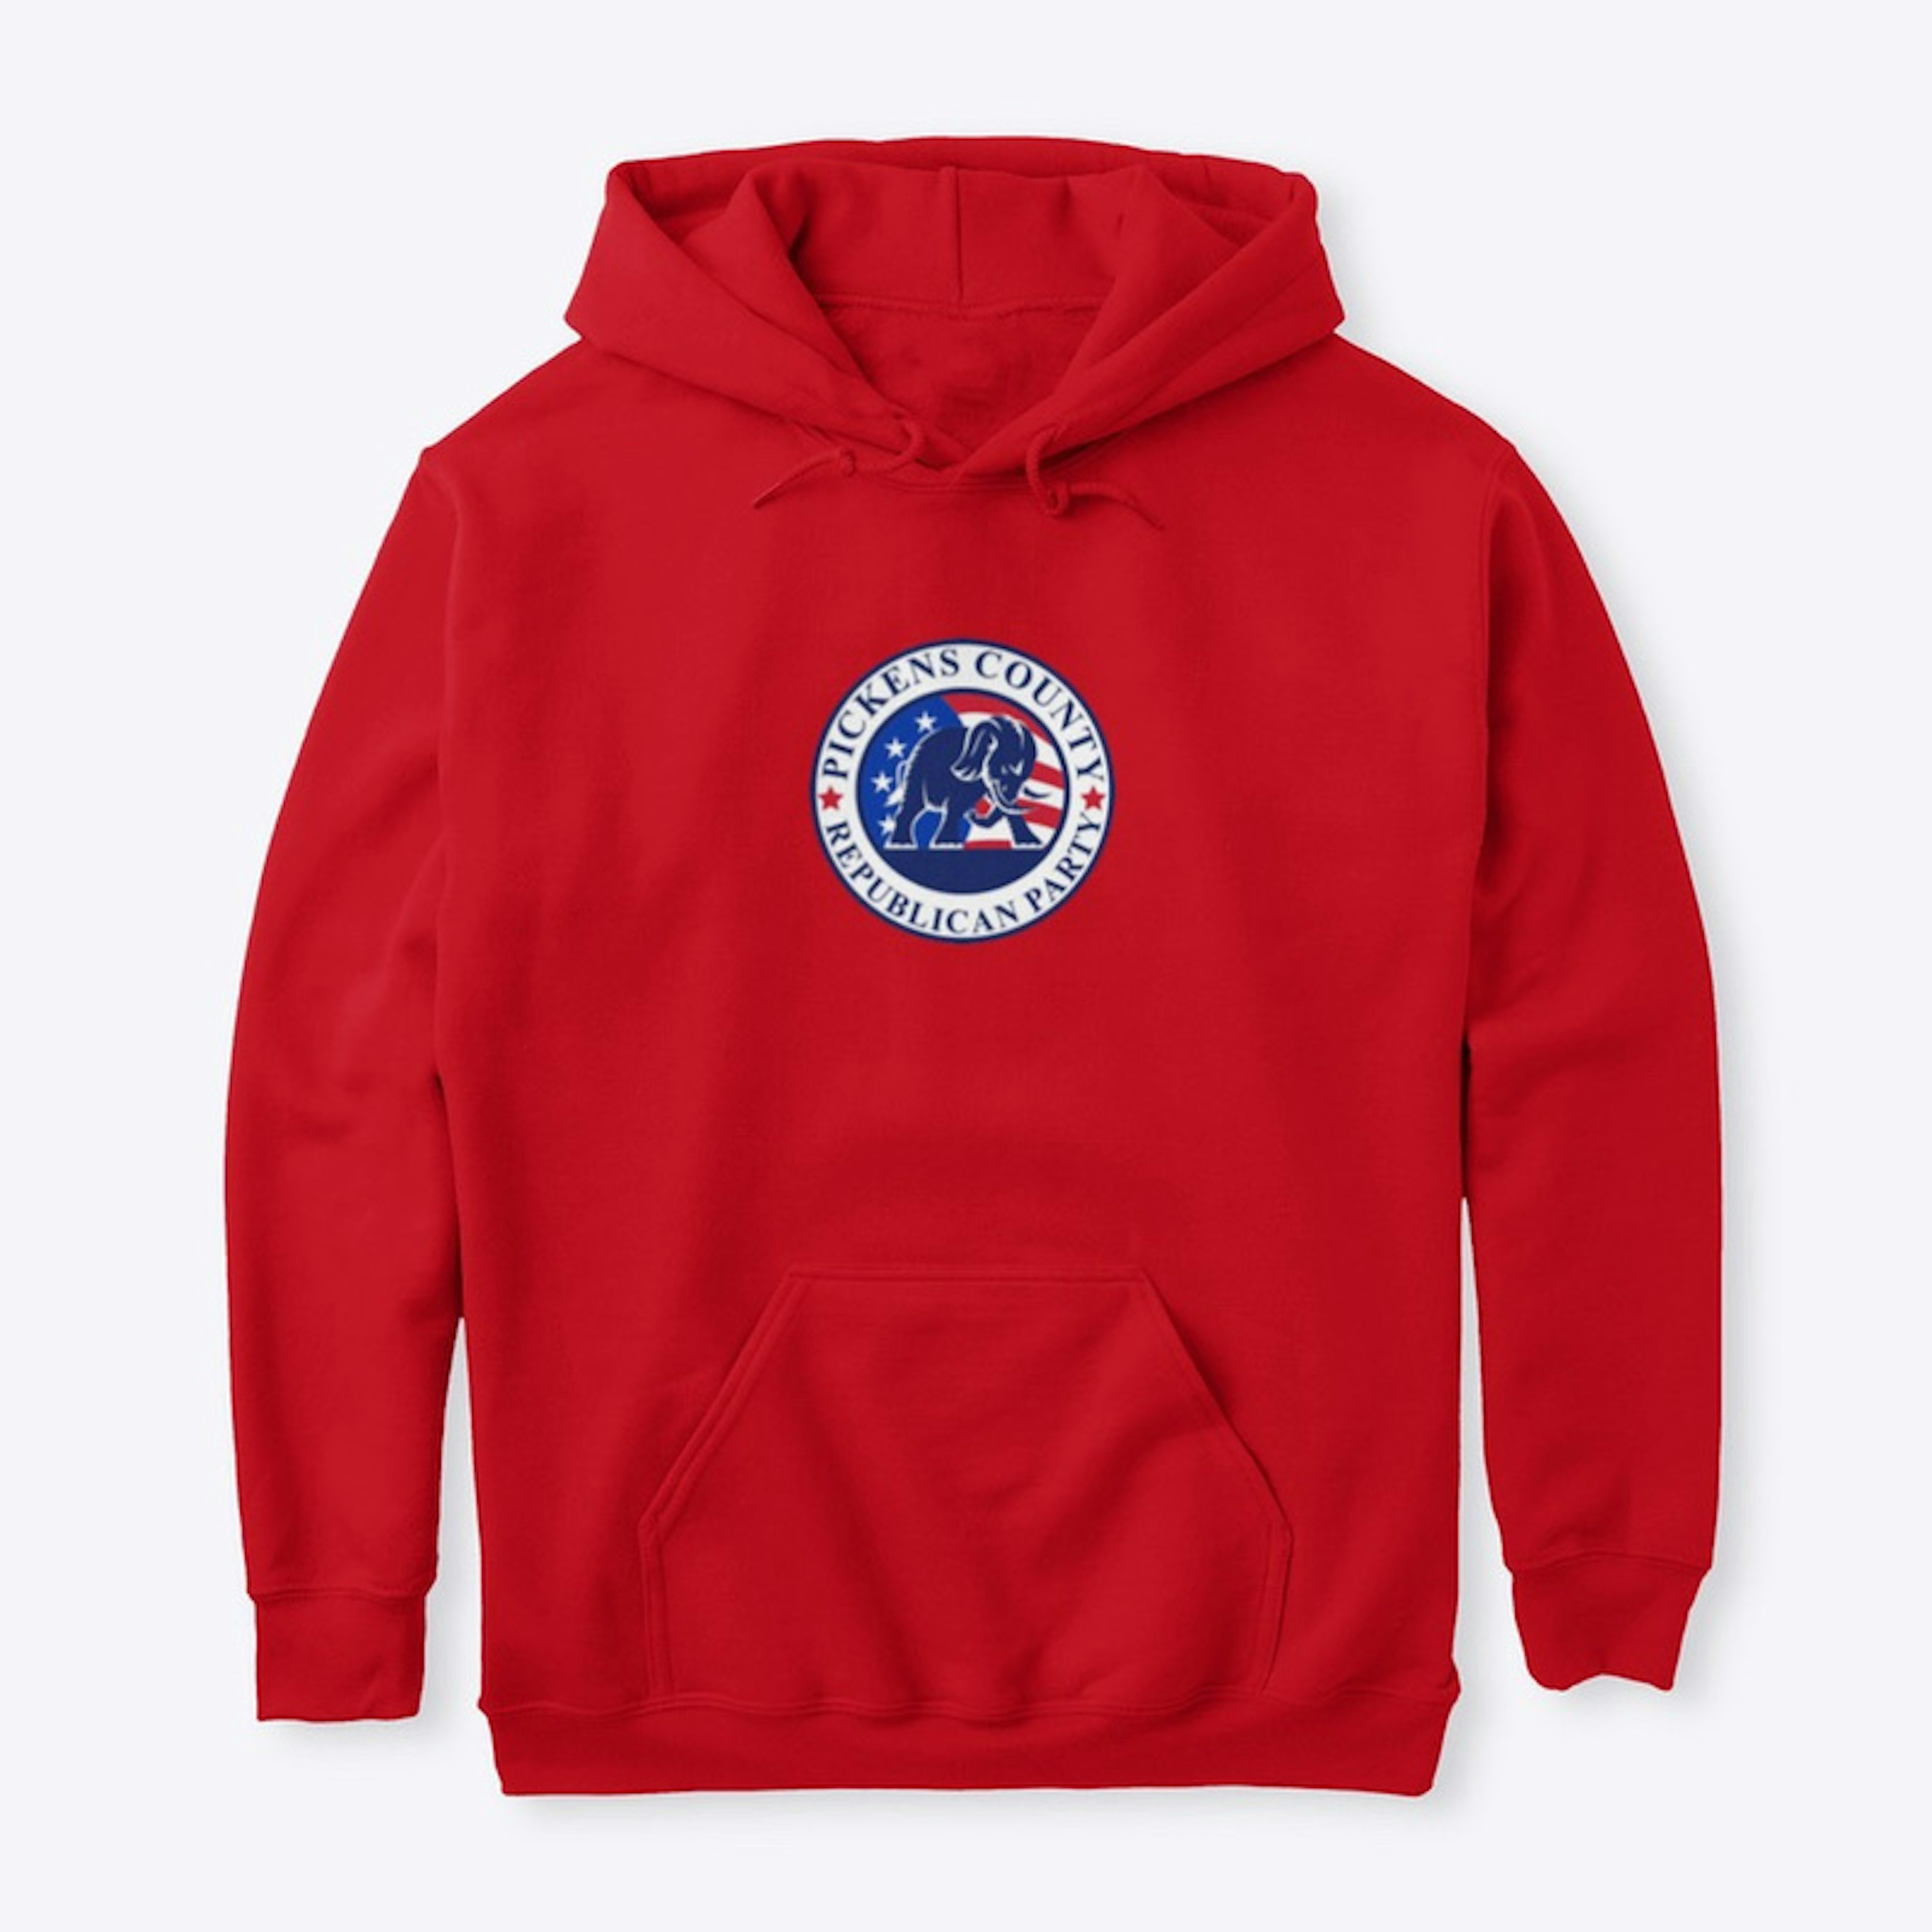 Pickens County GOP Classic Hoodie